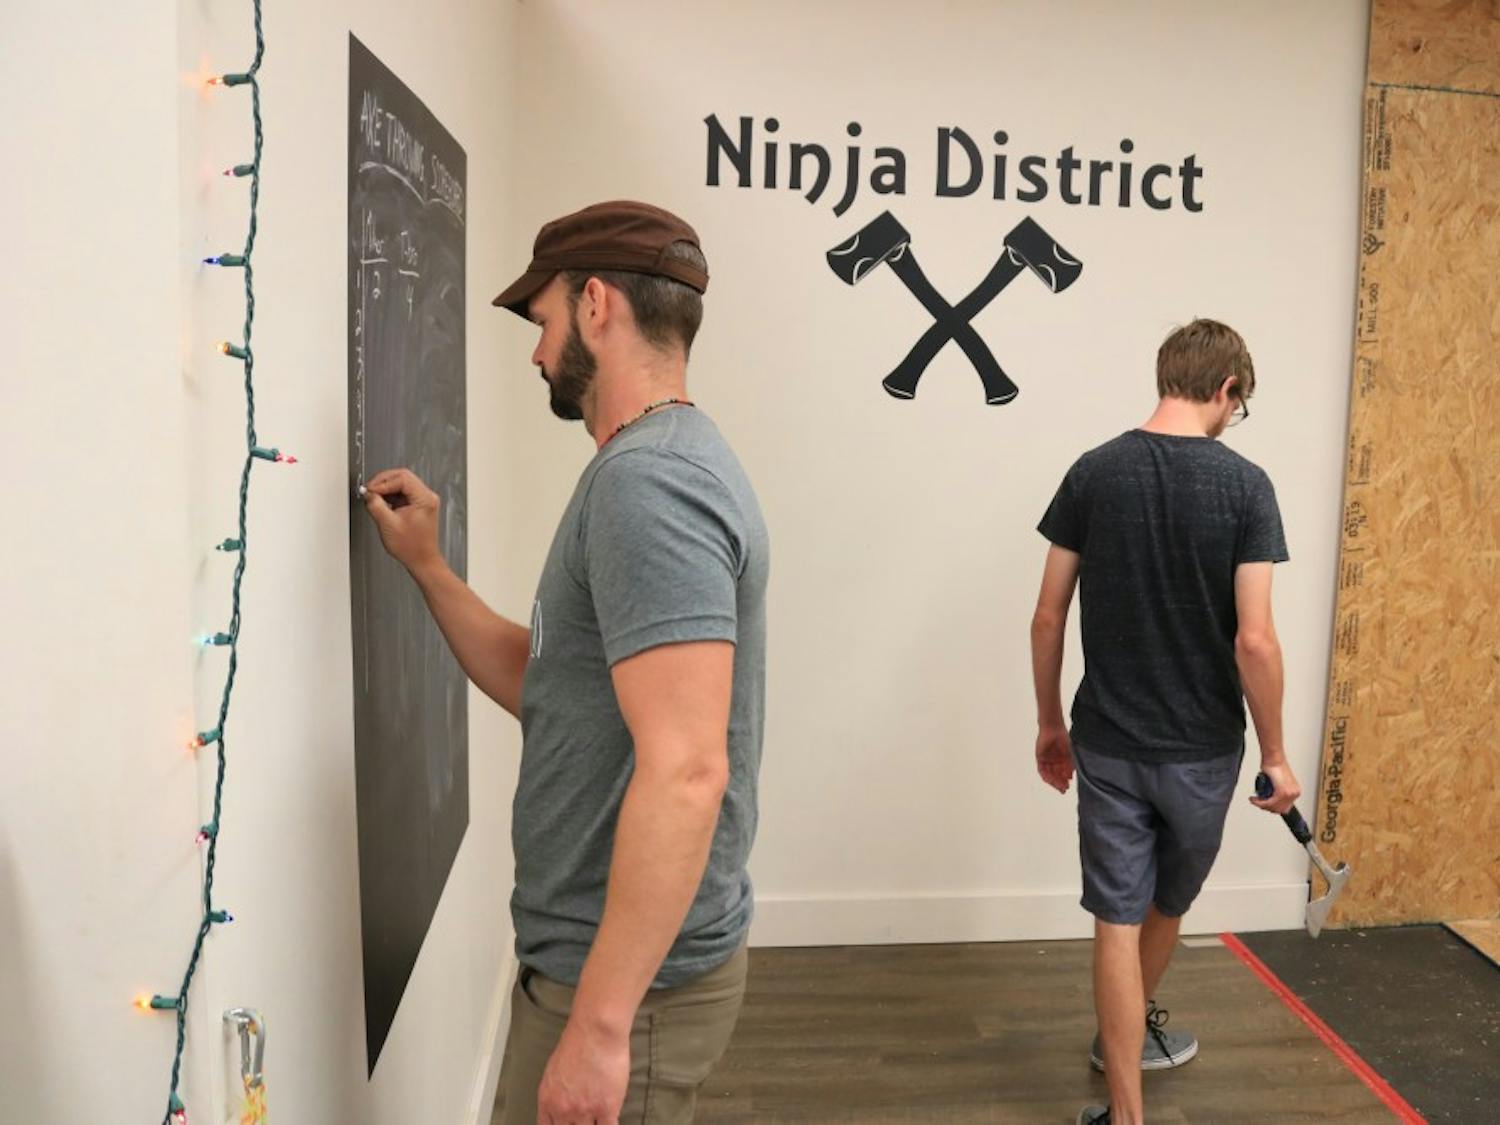 Axe-throwing in the Ninja District